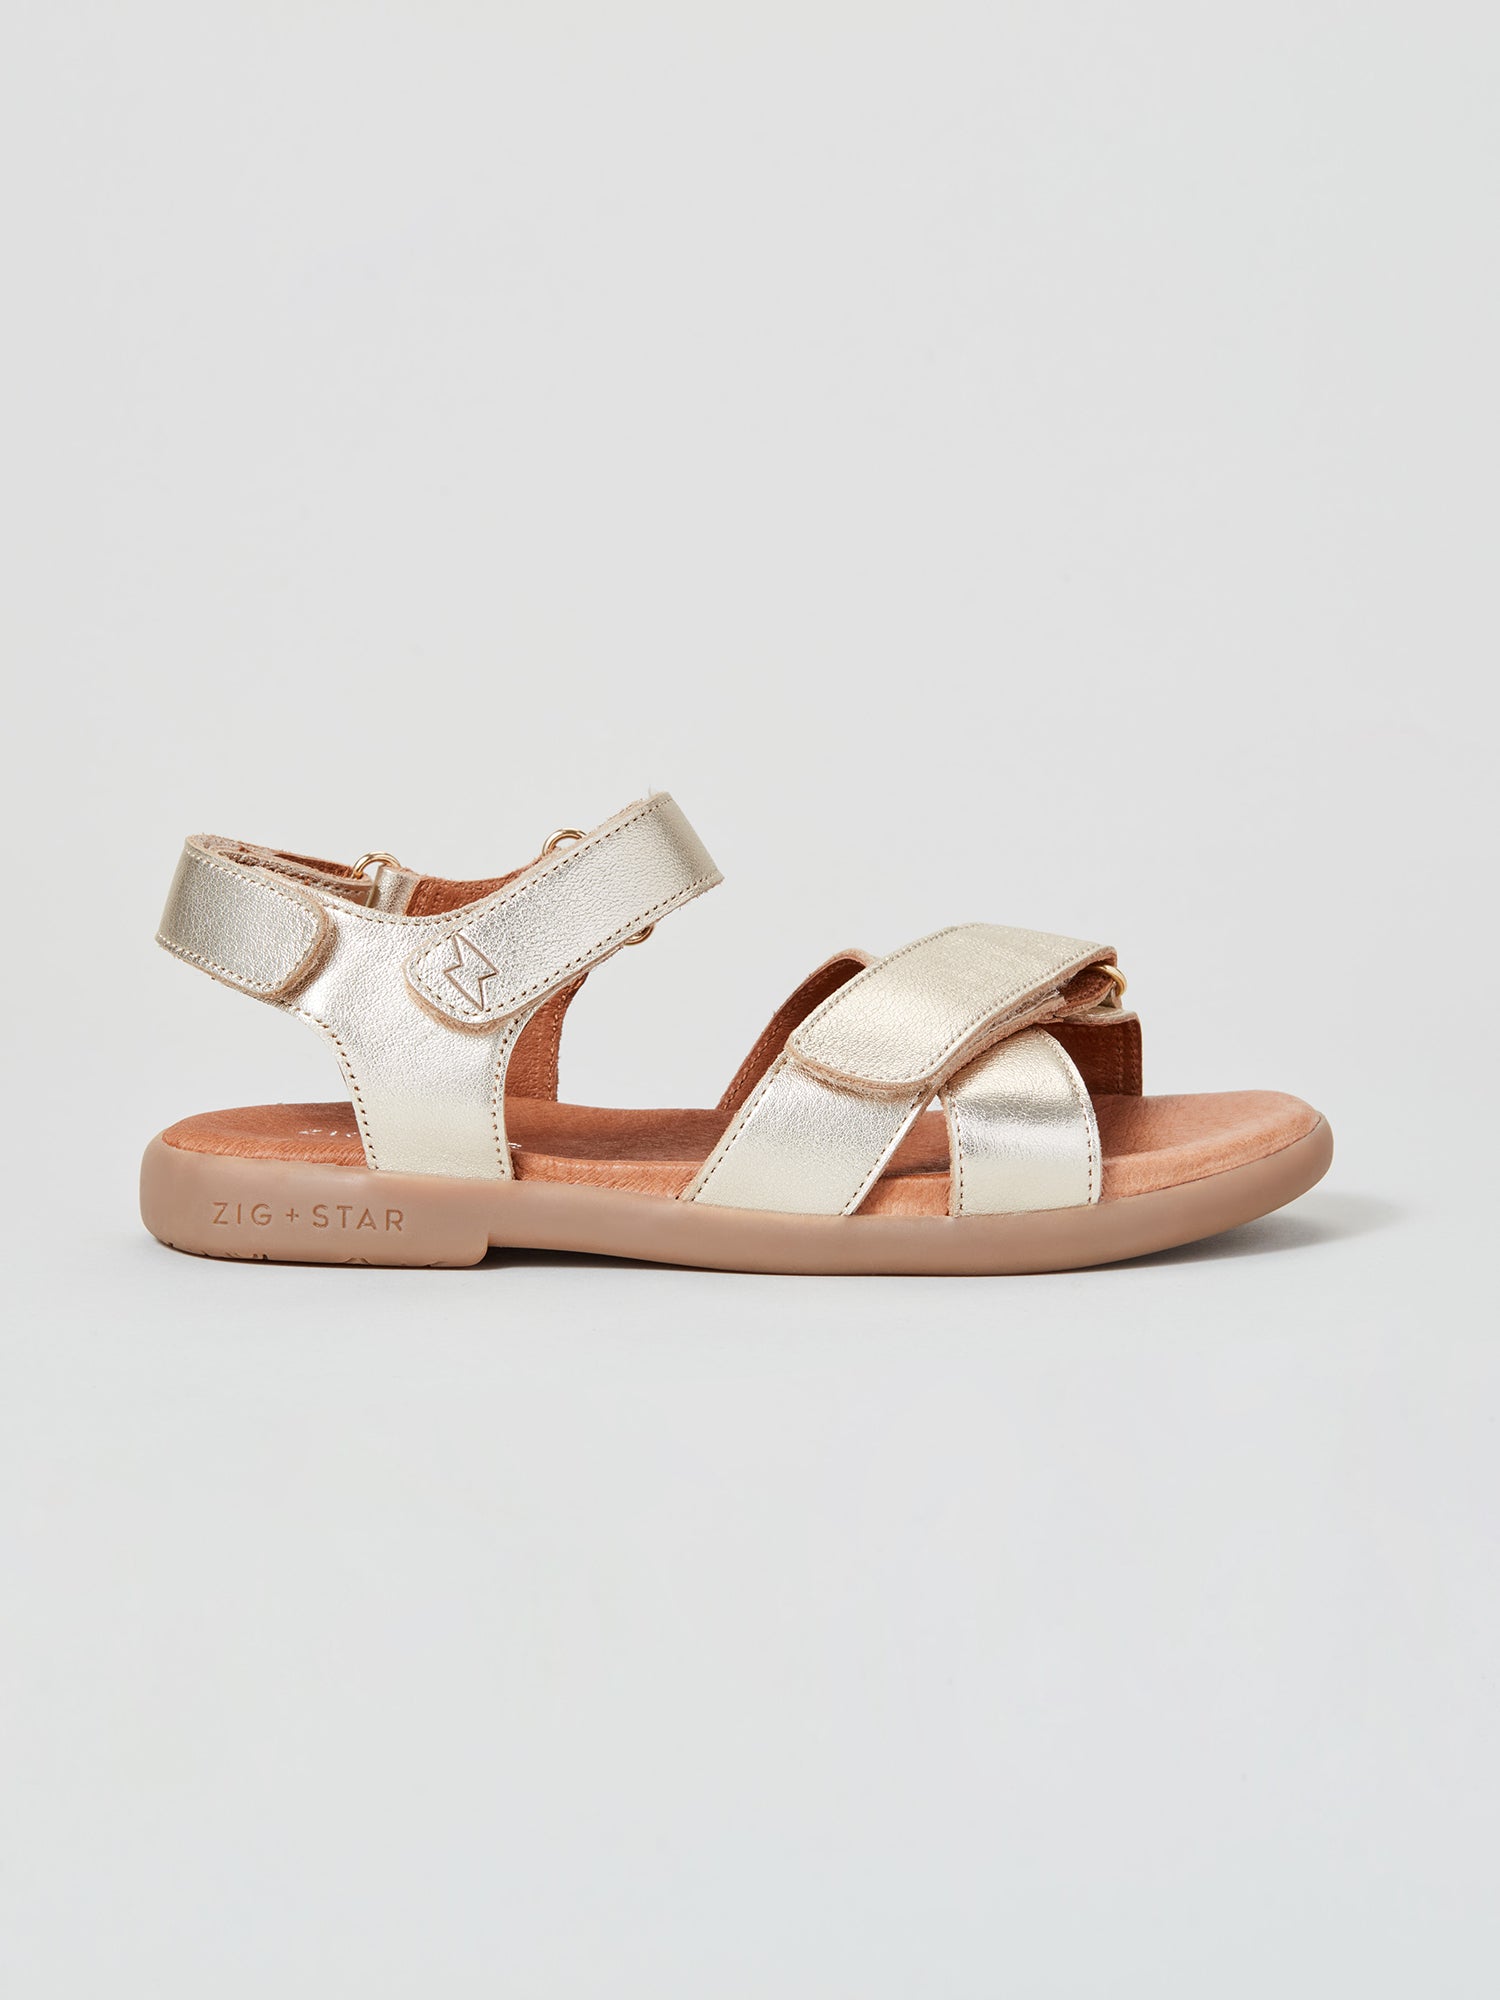 Spring Summer Sandals – Zig and Star